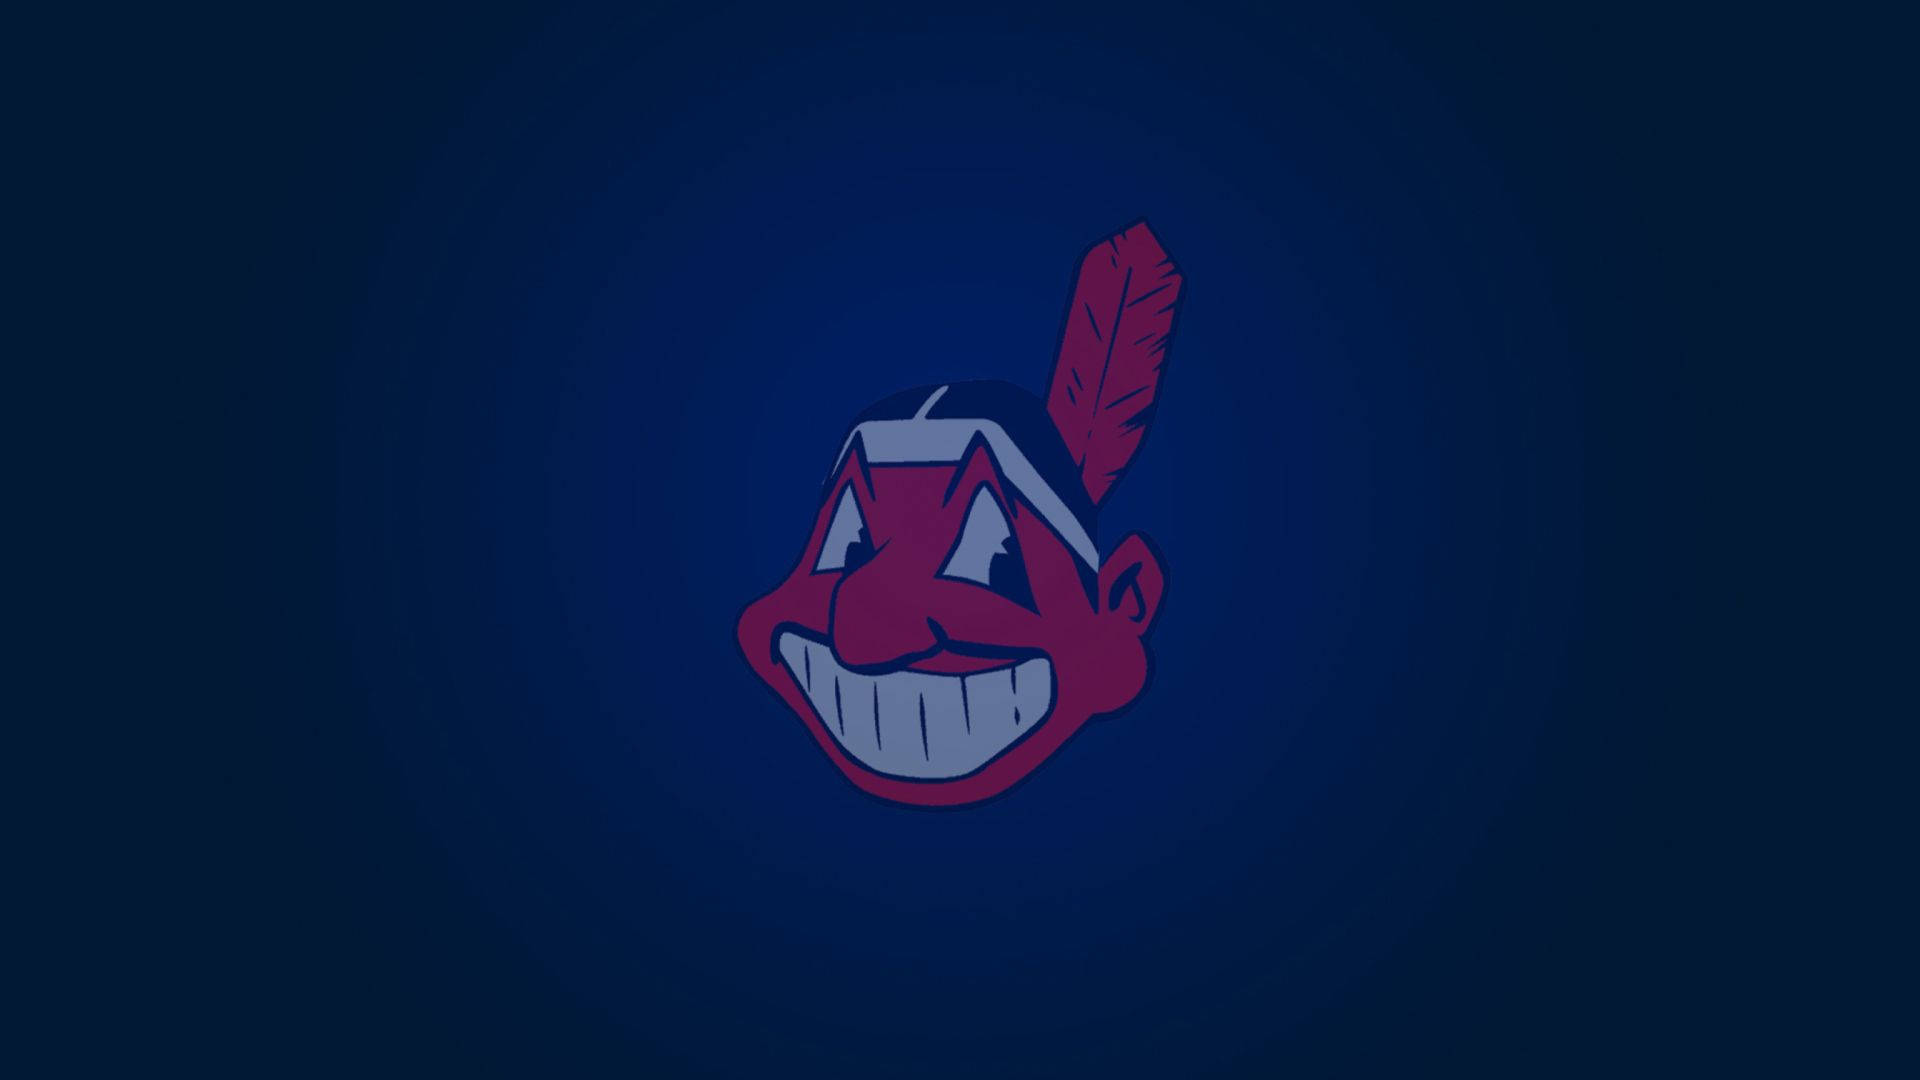 Clevelandindians Tribe Faded Logo Would Be Translated To 